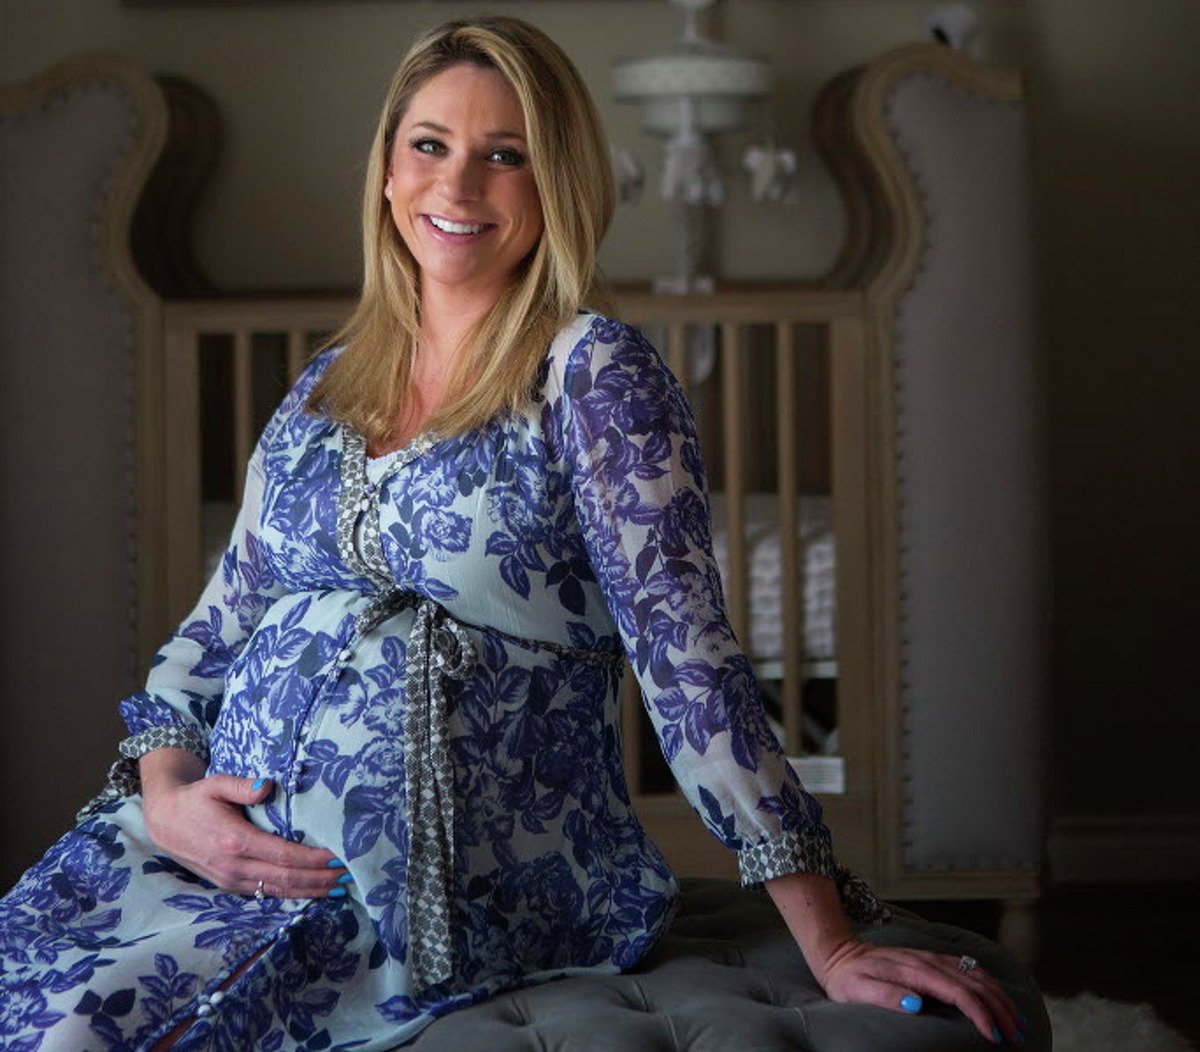 PHOTOS: Houston TV anchors and their little bundles of joy Chita Craft is making final preparations for the birth of her and Lane's son, Les William Craft, inside their Houston home Wednesday, March 1, 2017. Wednesday was the baby's due date. See which Houston TV personalities have recently welcomed new members into their families ...